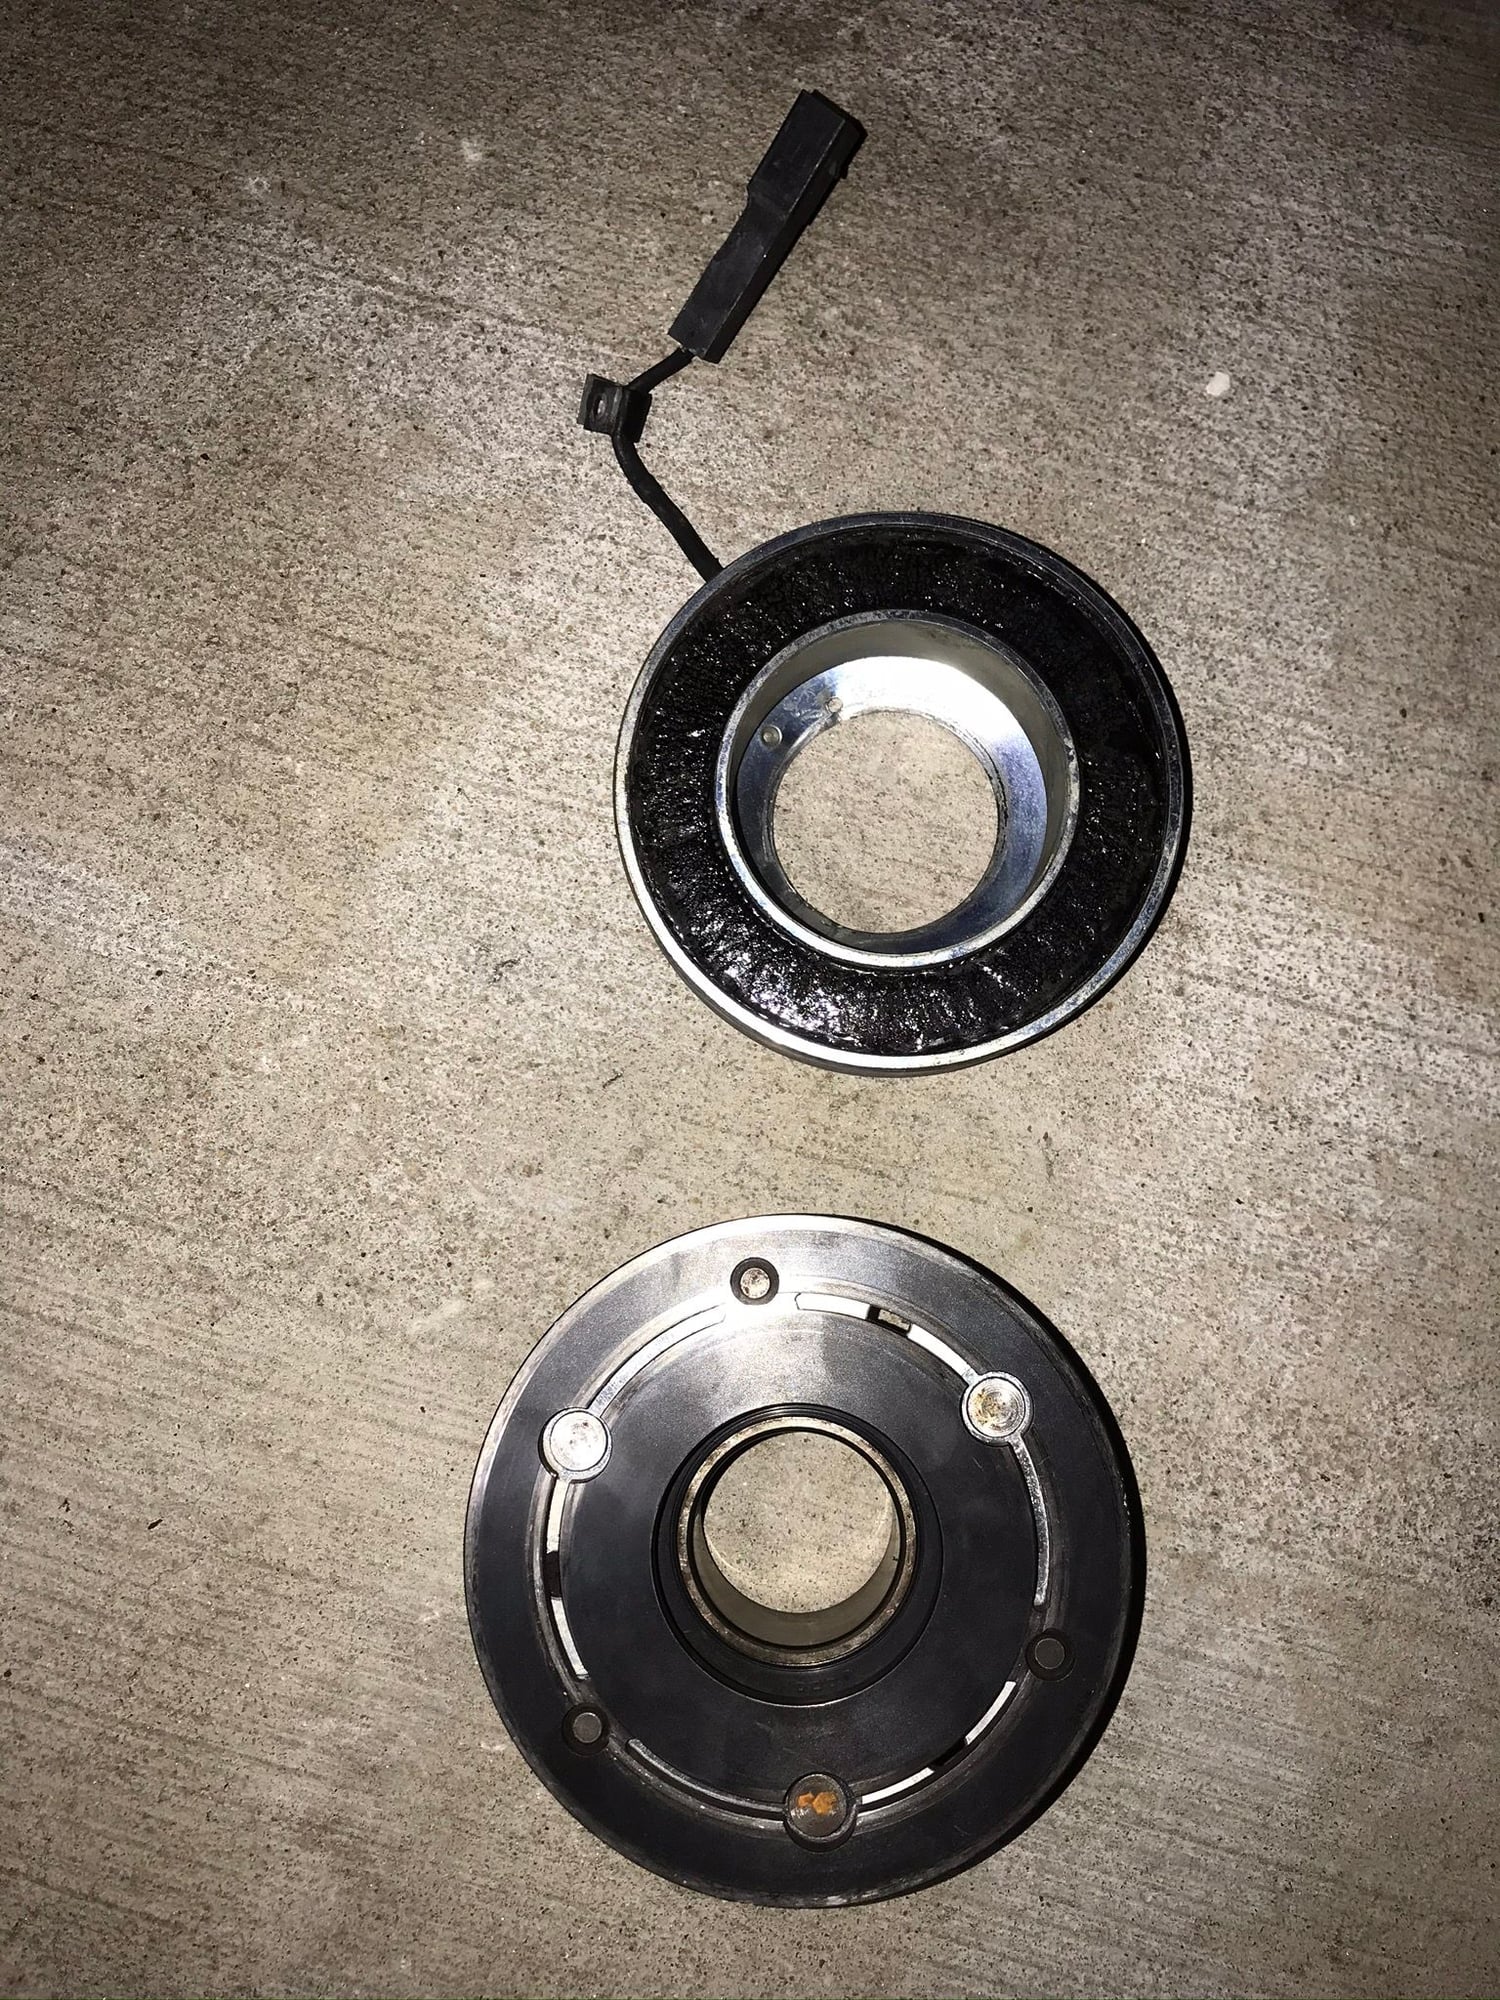 Engine - Intake/Fuel - M113 pulley - Used - 2003 to 2006 Mercedes-Benz E55 AMG - Midlothian, VA 23112, United States